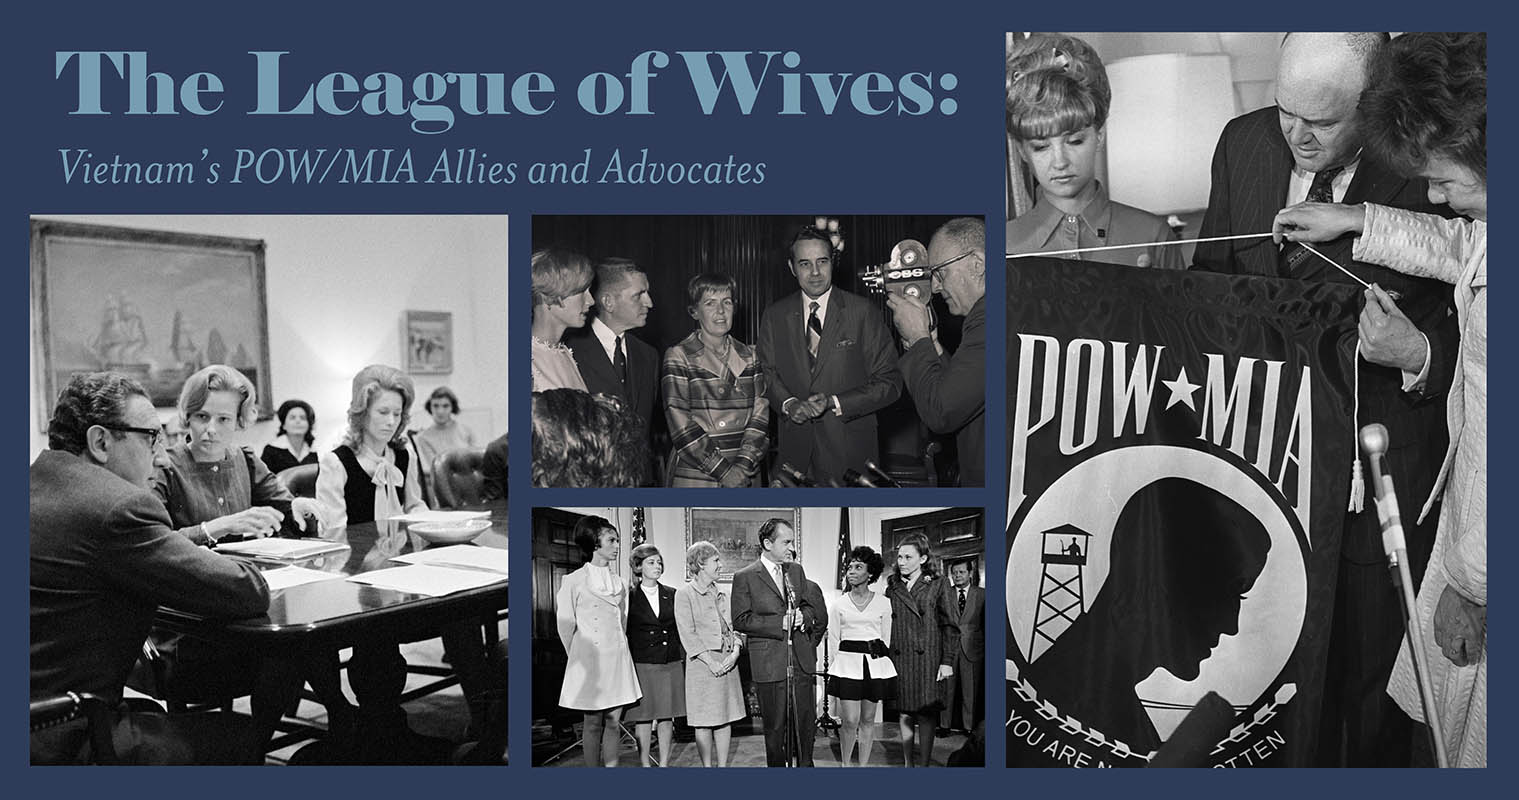 exhibit banner. A vignette of black and white photos of wives of 'MIA' (missing in action) and 'POW" (prisoners of war) are shown meeting with various political figures and holding a POW MIA flag.